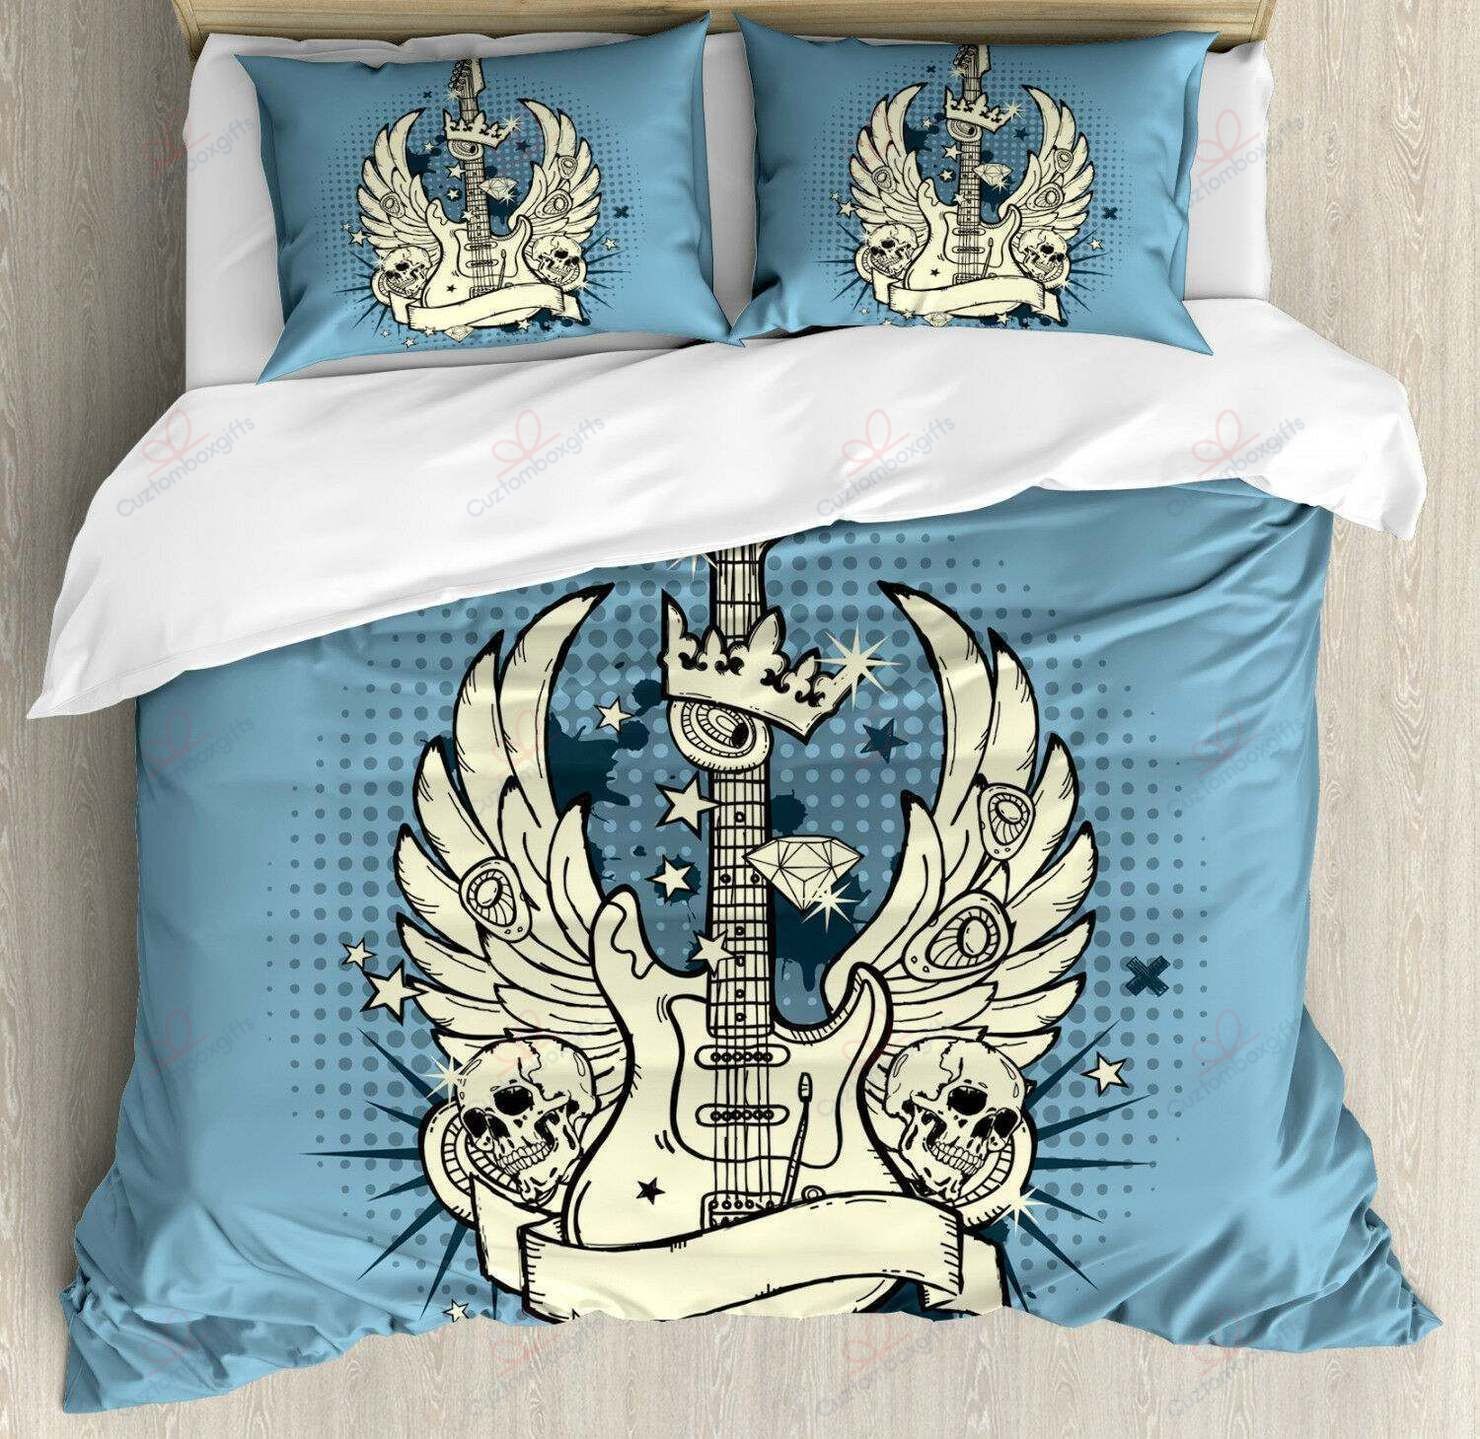 Artwork Guitar Wings With Crown Printed Bedding Set Bedding Sets